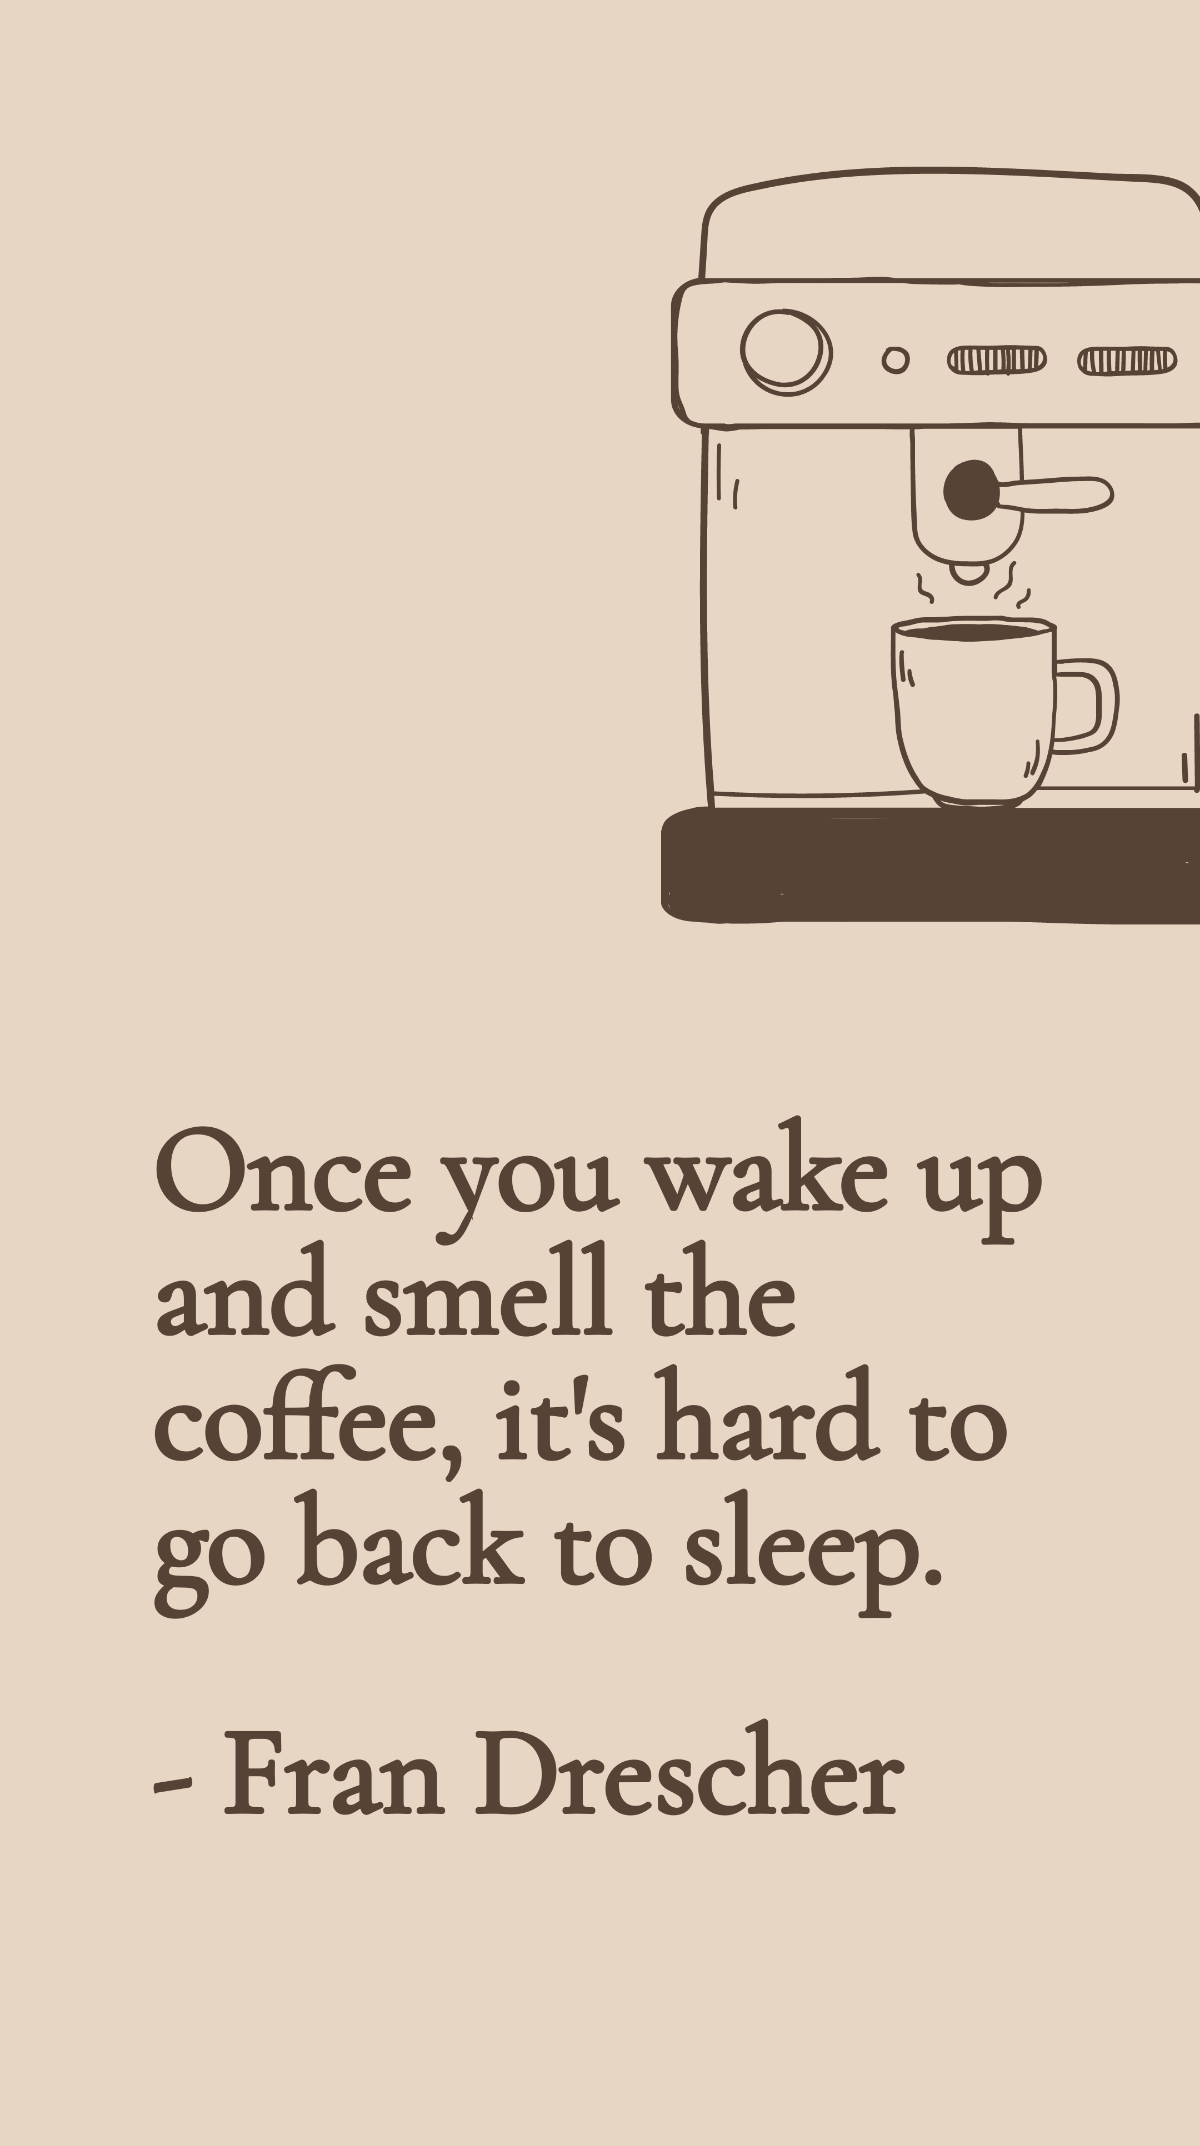 Fran Drescher - Once you wake up and smell the coffee, it's hard to go back to sleep. Template